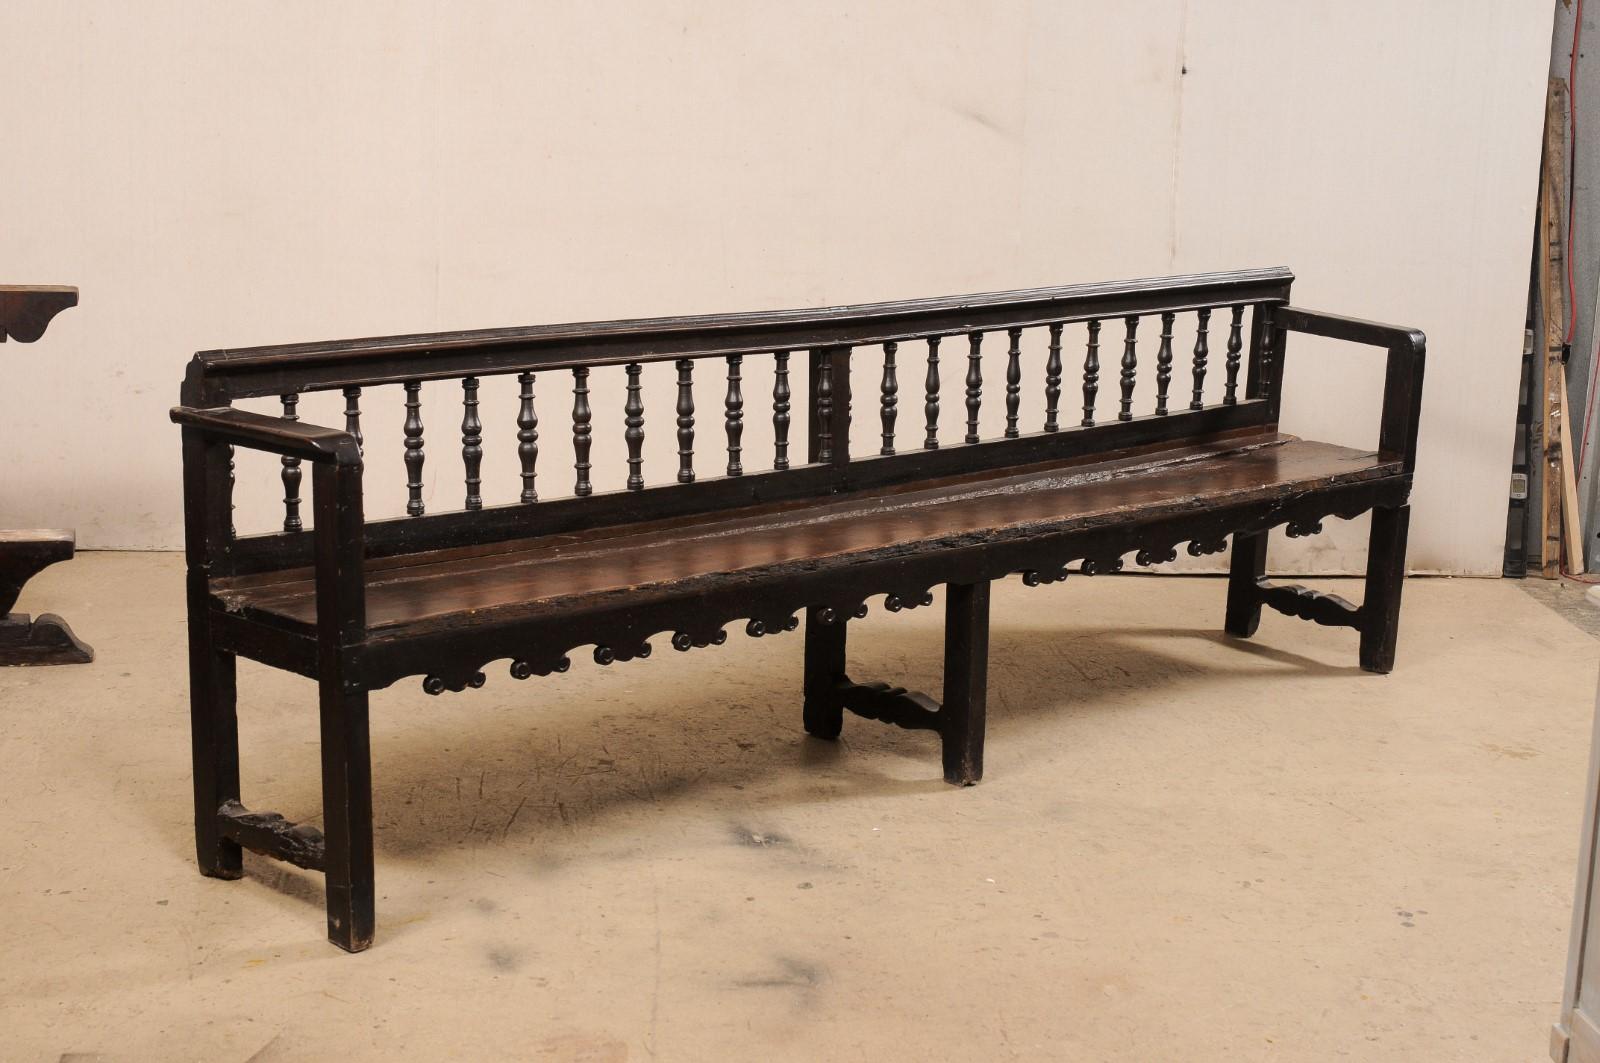 A Spanish carved-wood, spindle back bench from the 18th century. This antique wooden bench from Spain features a linear molded top chair rail with nicely-turned spindles set within the back rests, straight arms flank either side of the rustic